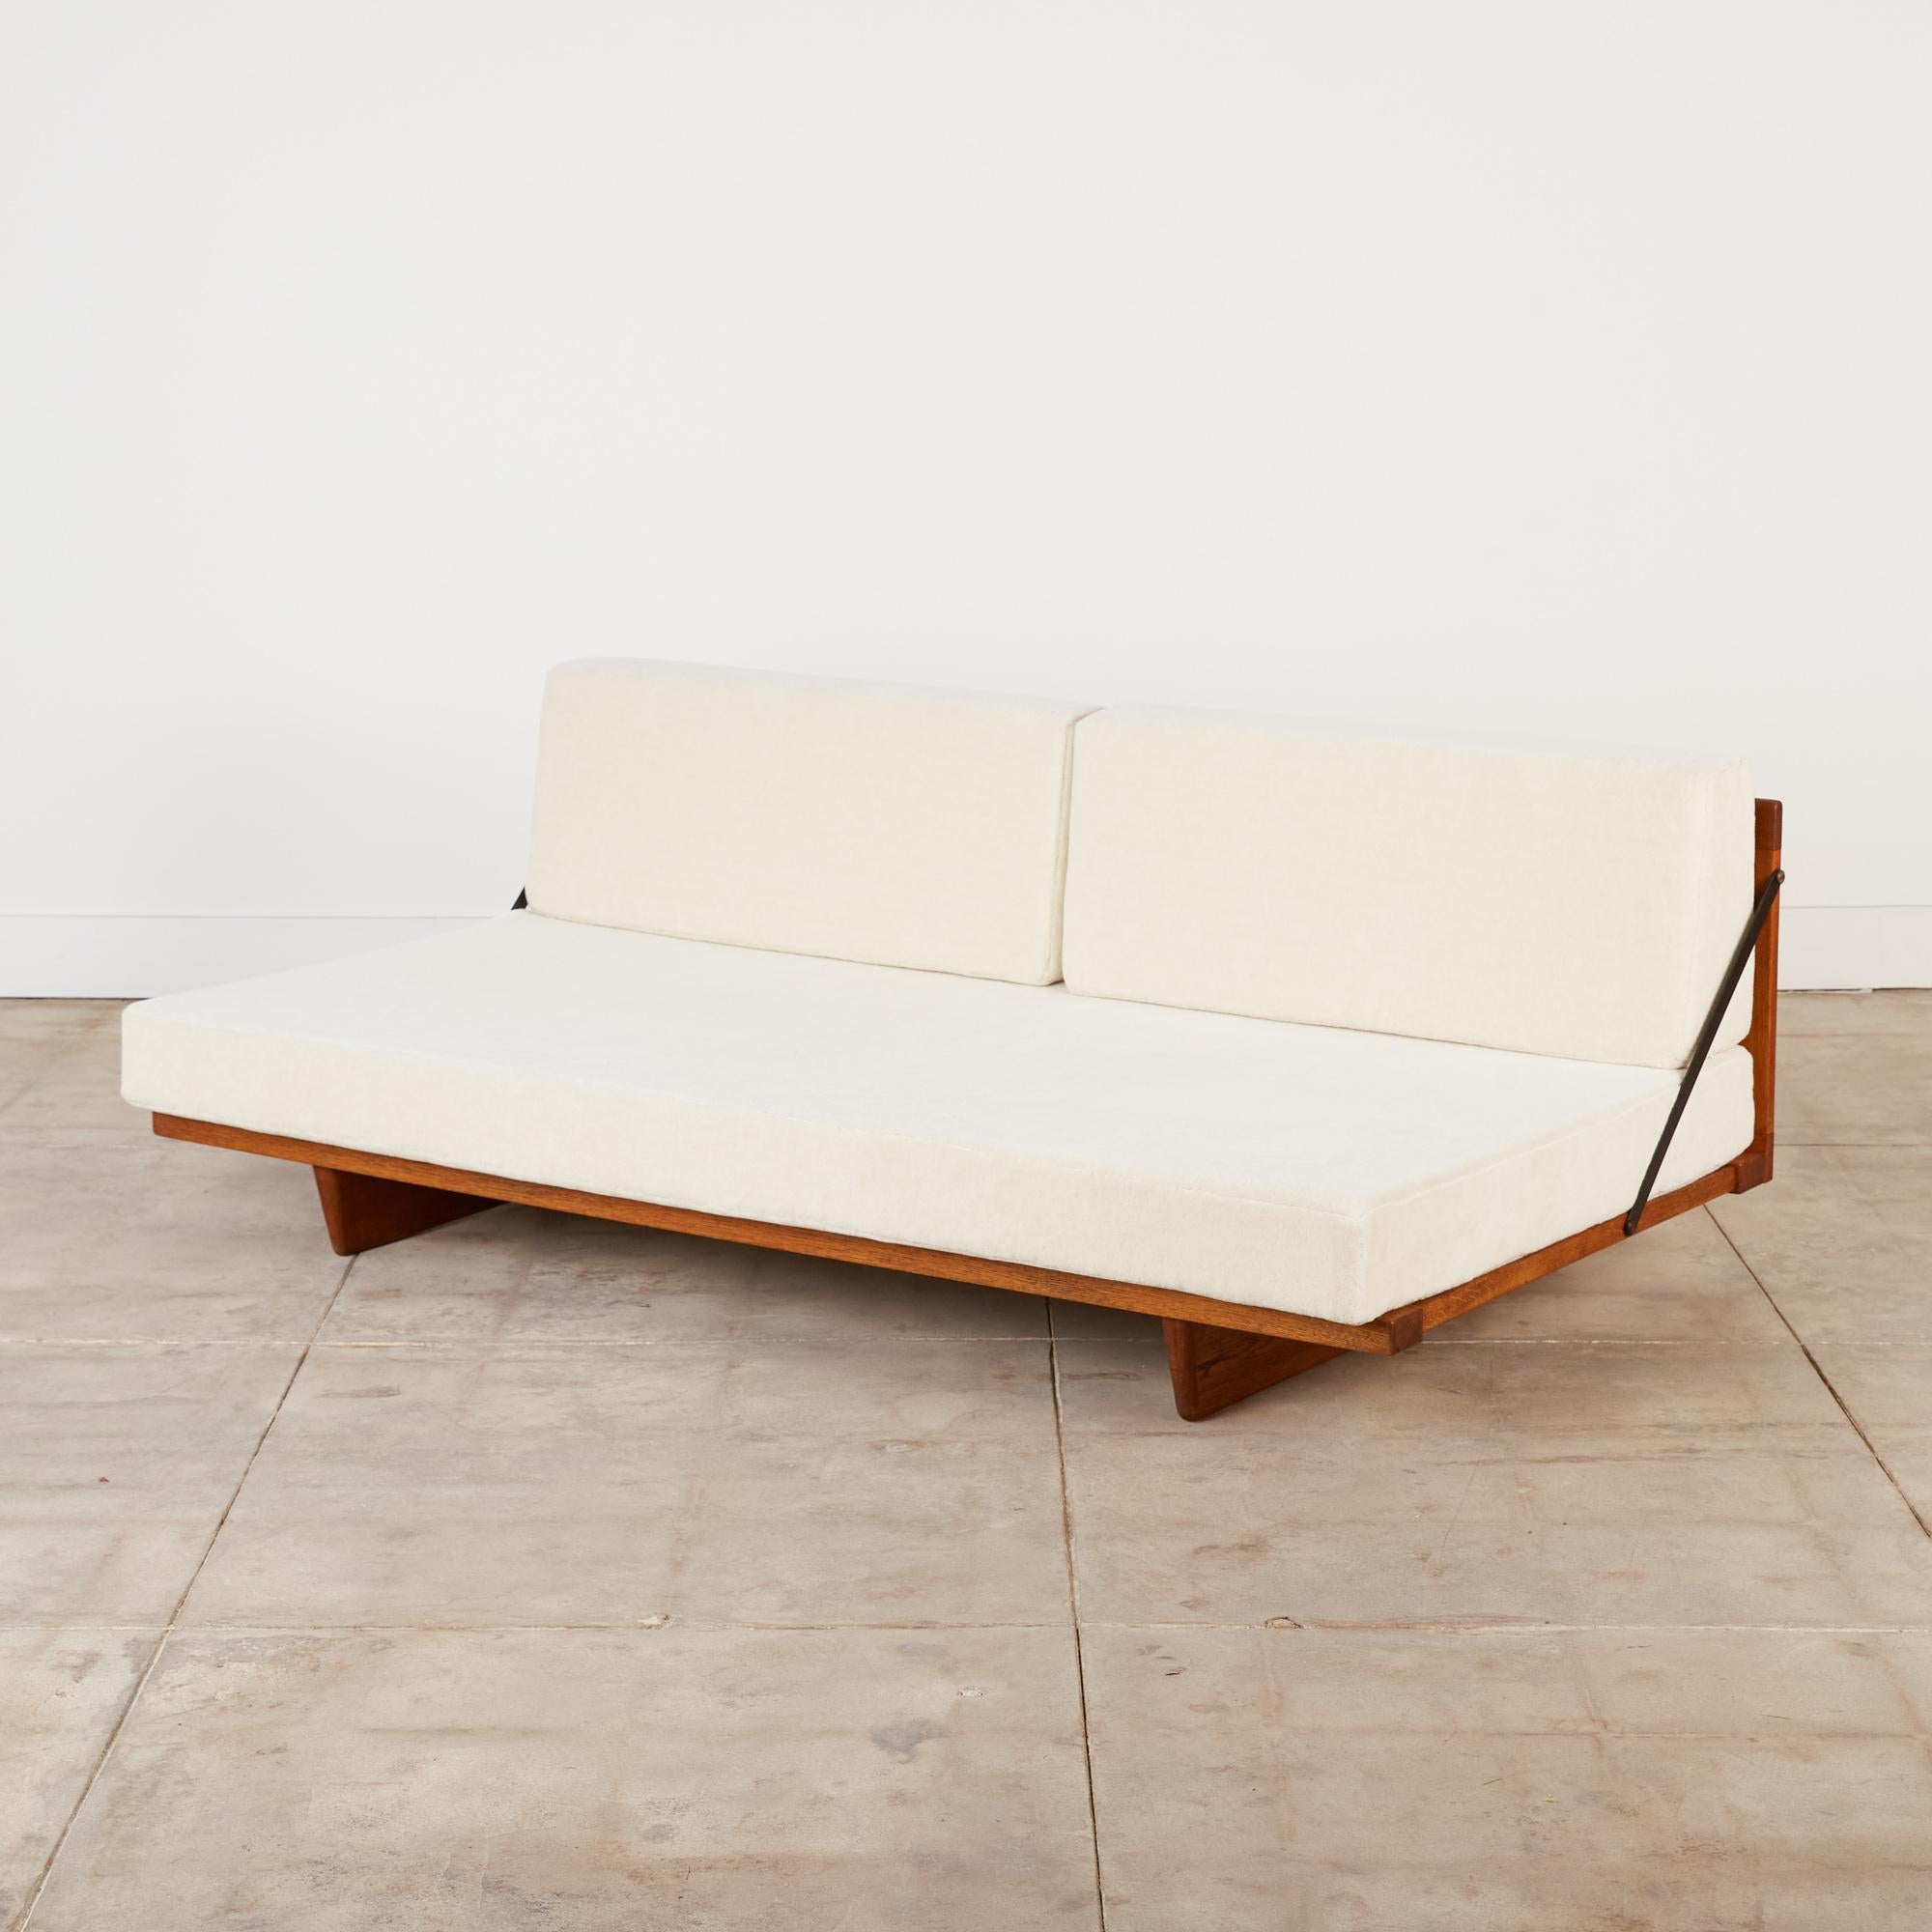 Børge Mogensen Model 192 daybed for Fredericia Stolefabrik, Denmark, c.1950s. This rare 1955 design features an oiled oak frame with slatted wood back and diagonal flat metal bars which serve as side supports. It has seat and back cushions covered